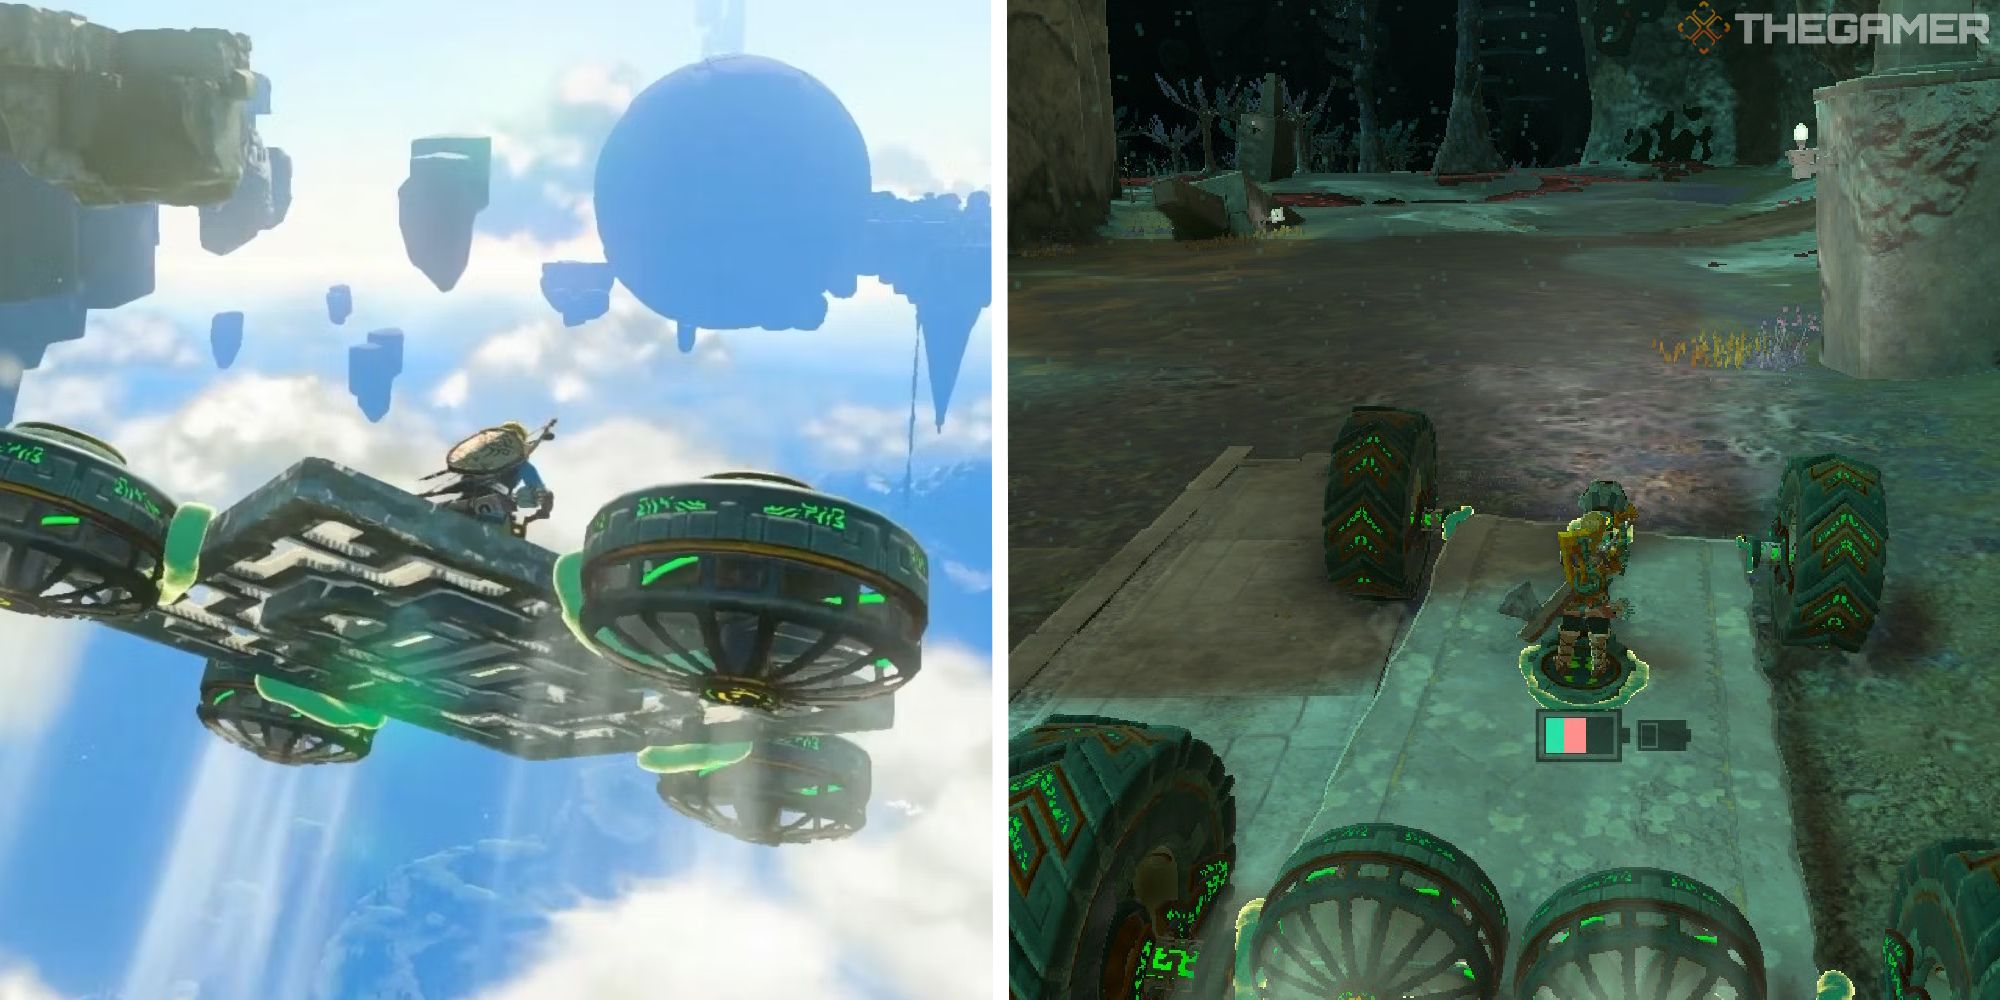 split image showing flying machine next to image of wheeled vehicle in chasm